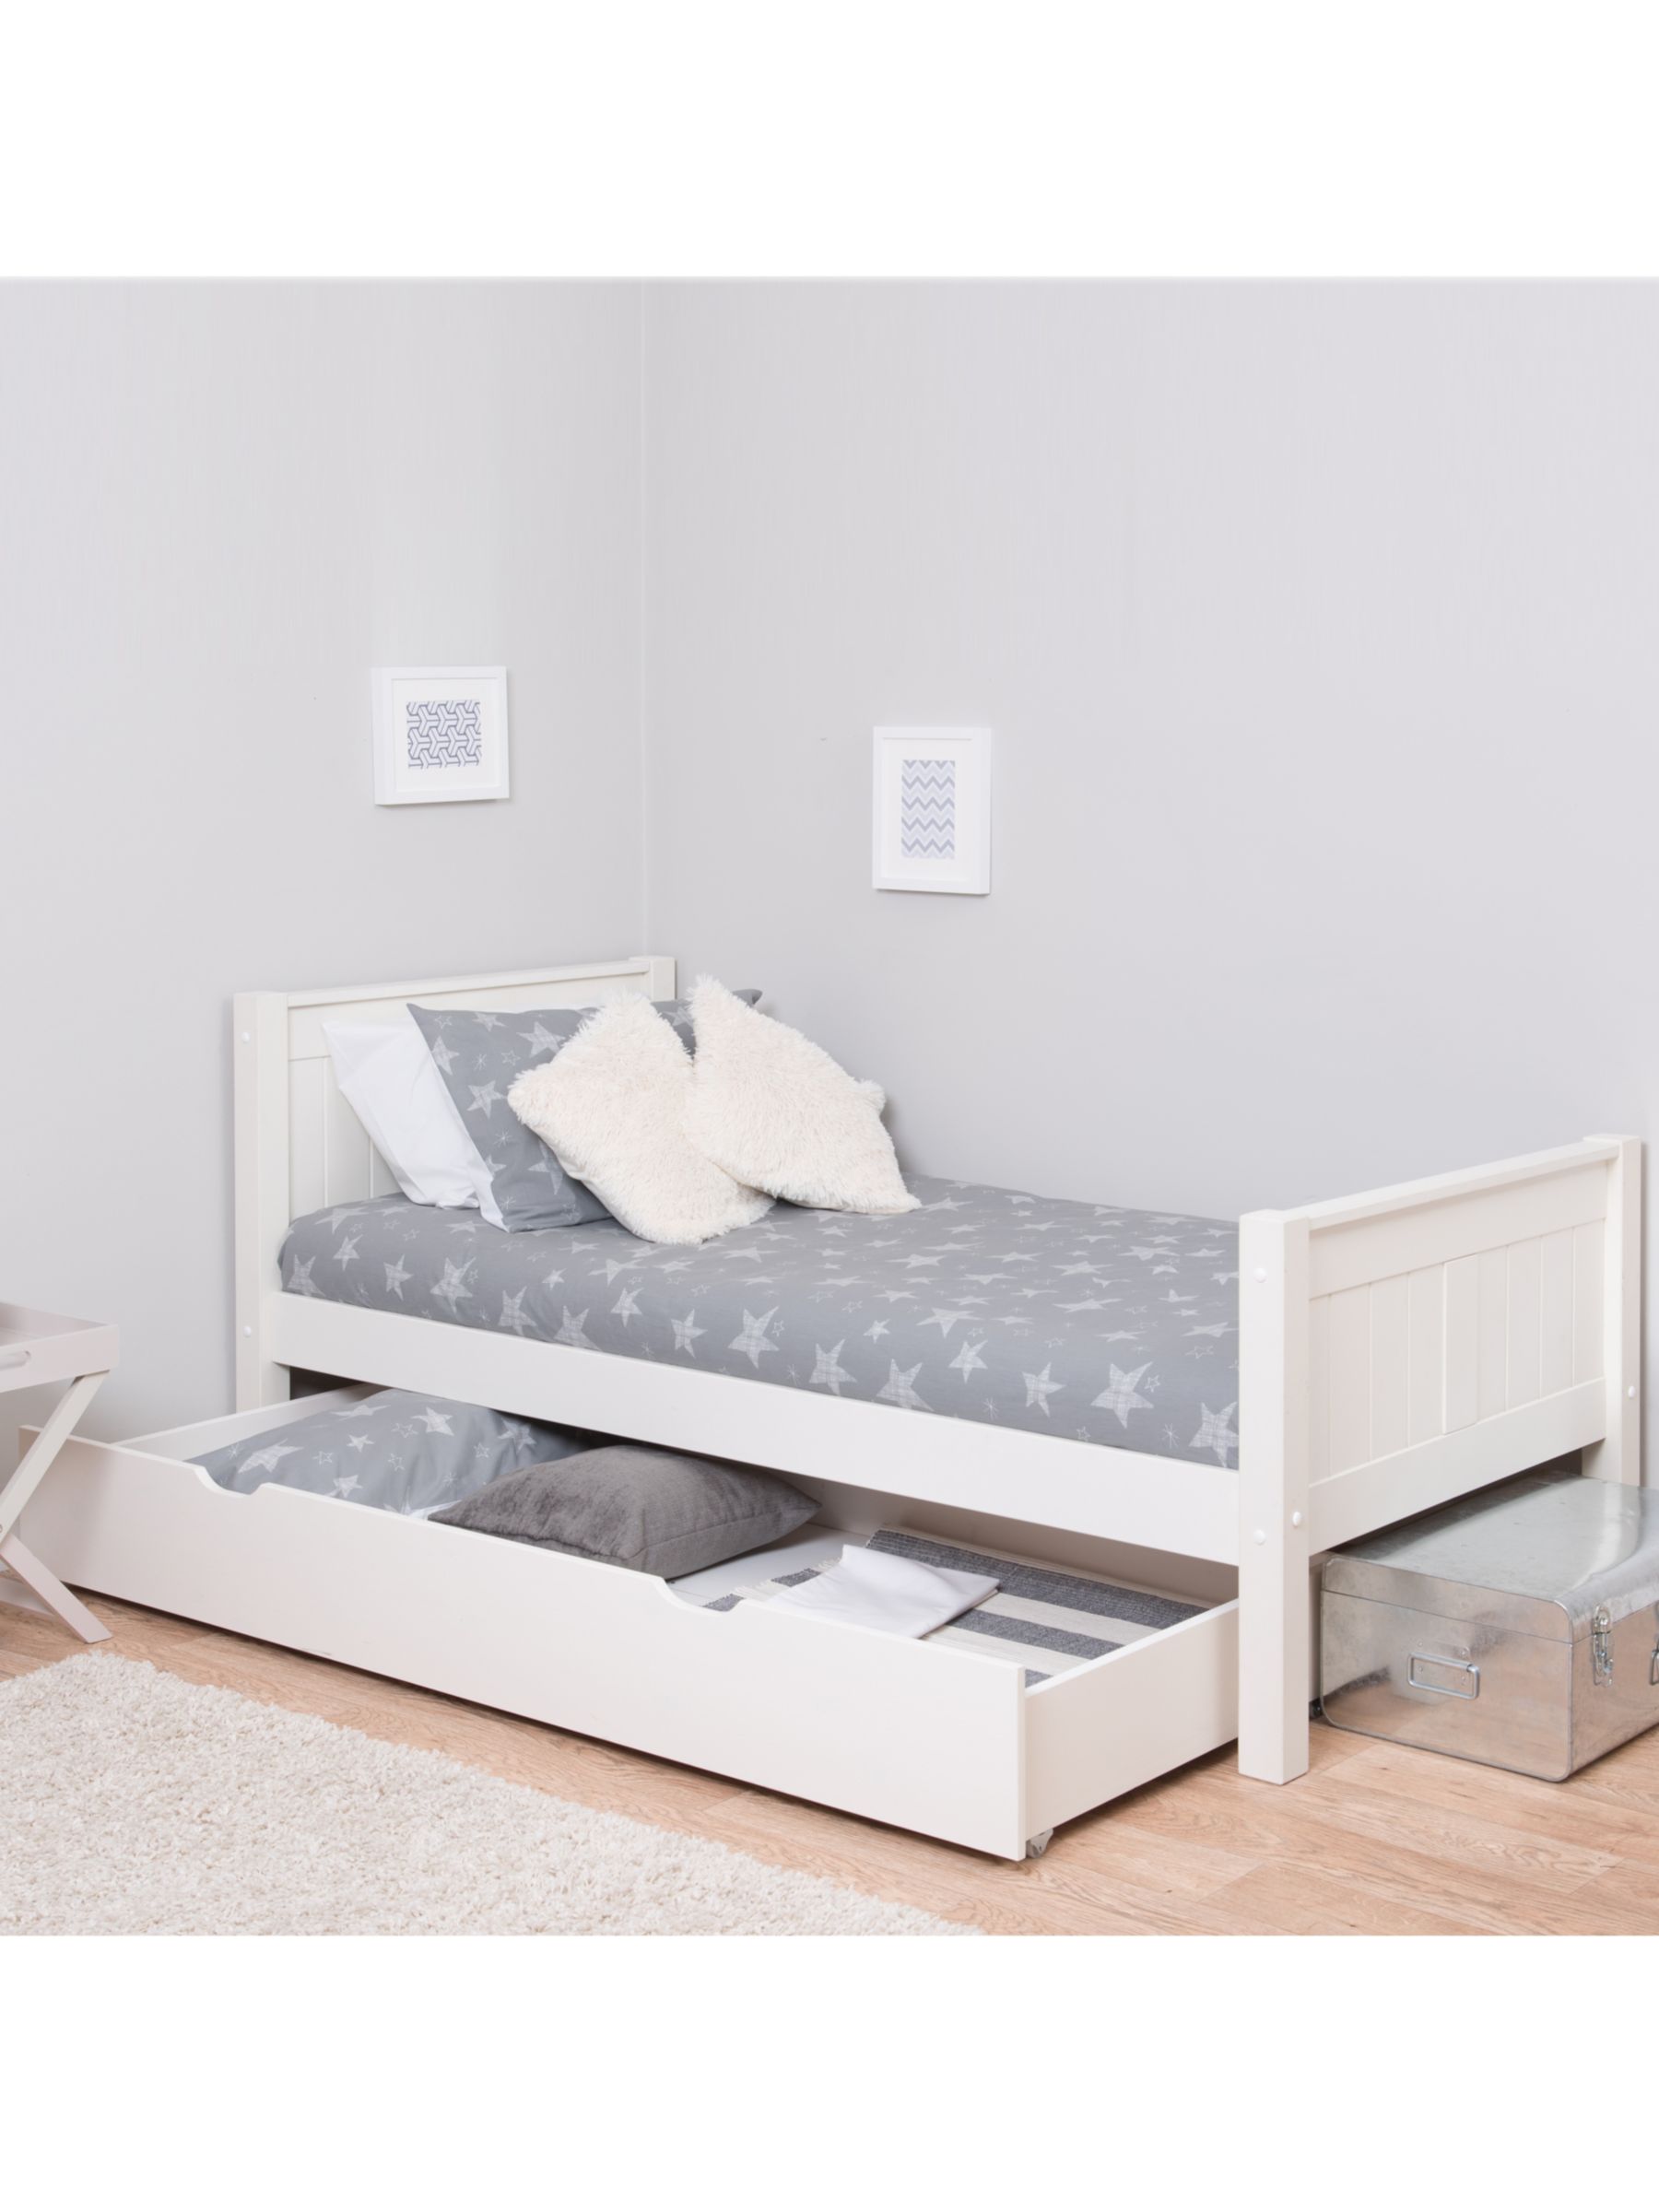 Photo of Stompa classic child compliant bed frame with trundle drawer single white